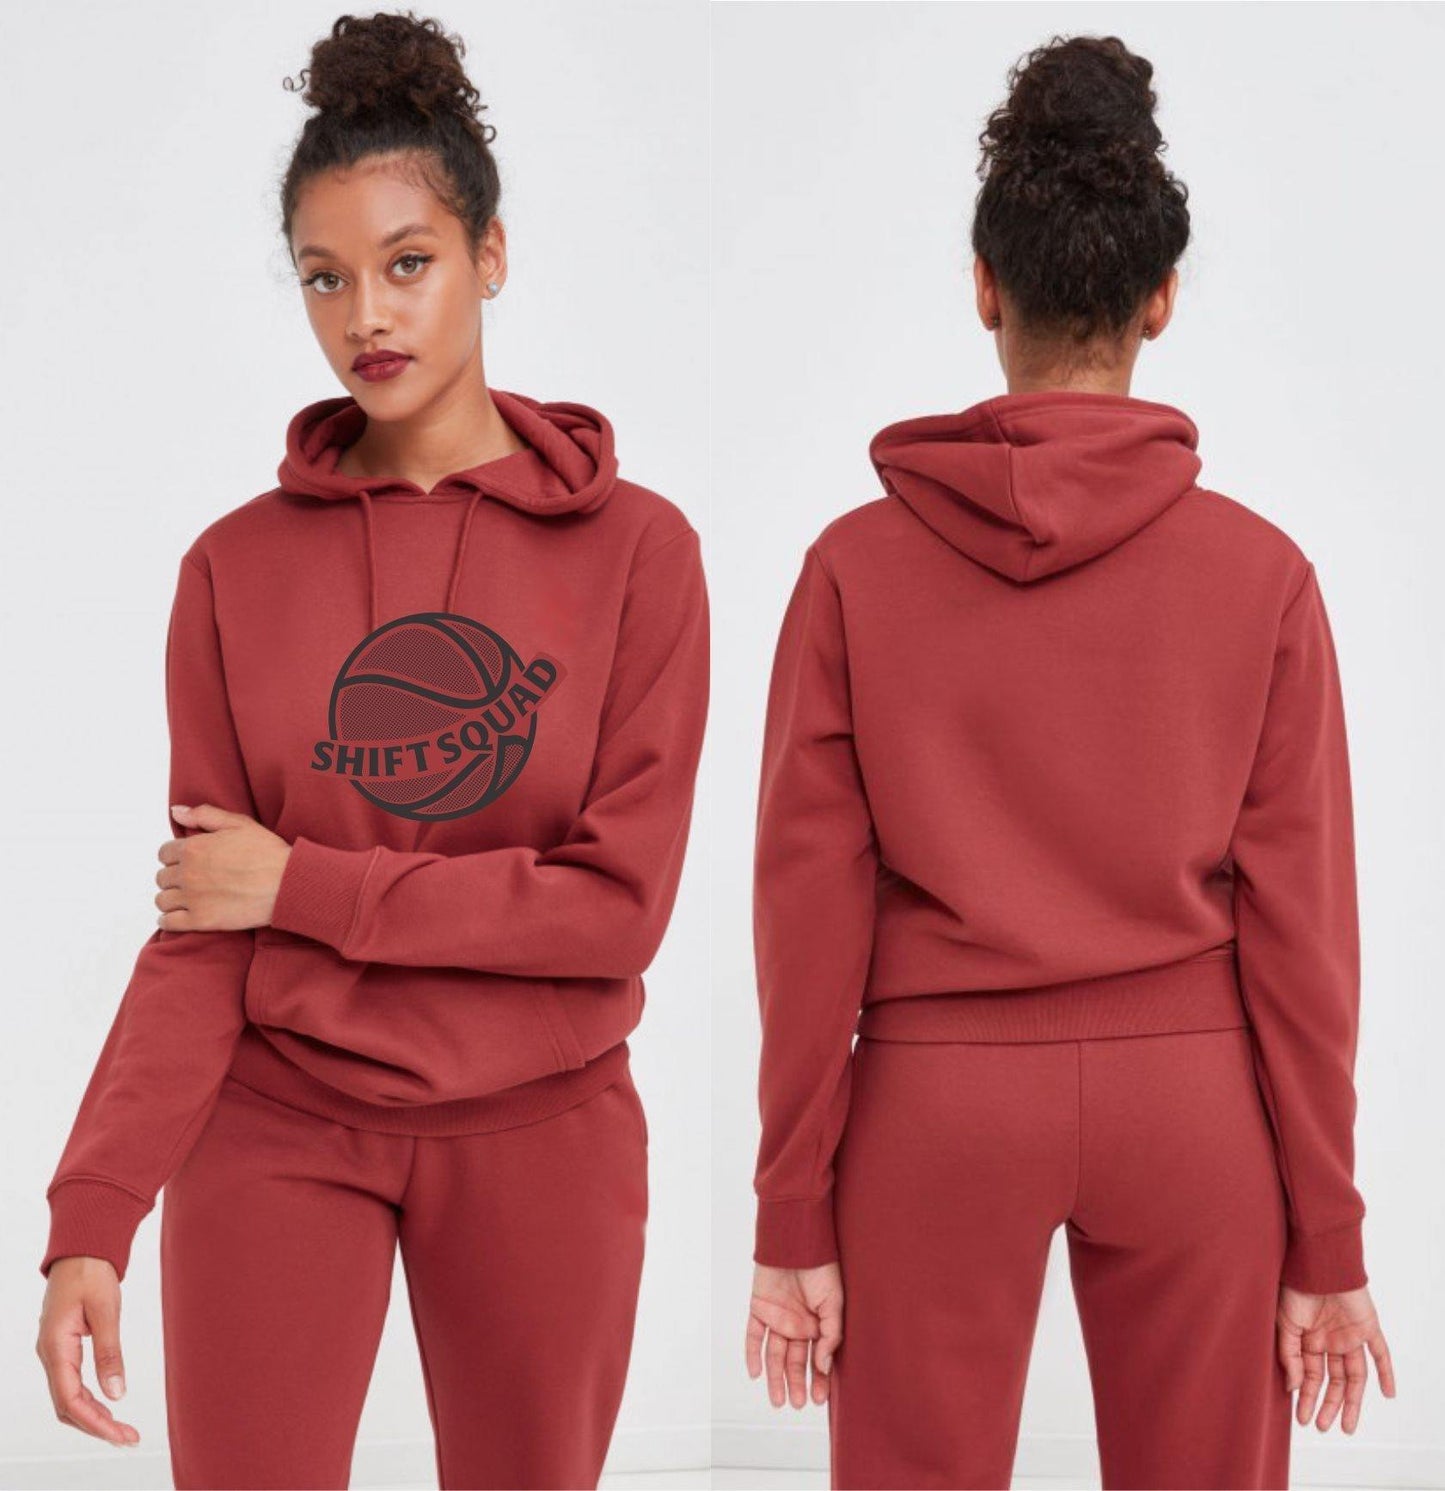 Red Shiftsquad Women's Hoodies Fall and Winter line - Shiftsquad